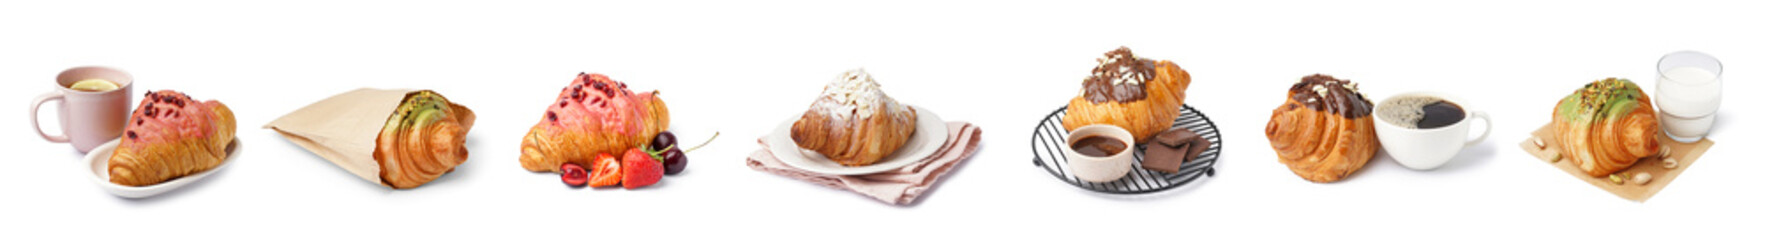 Collage of tasty sweet croissants on white background